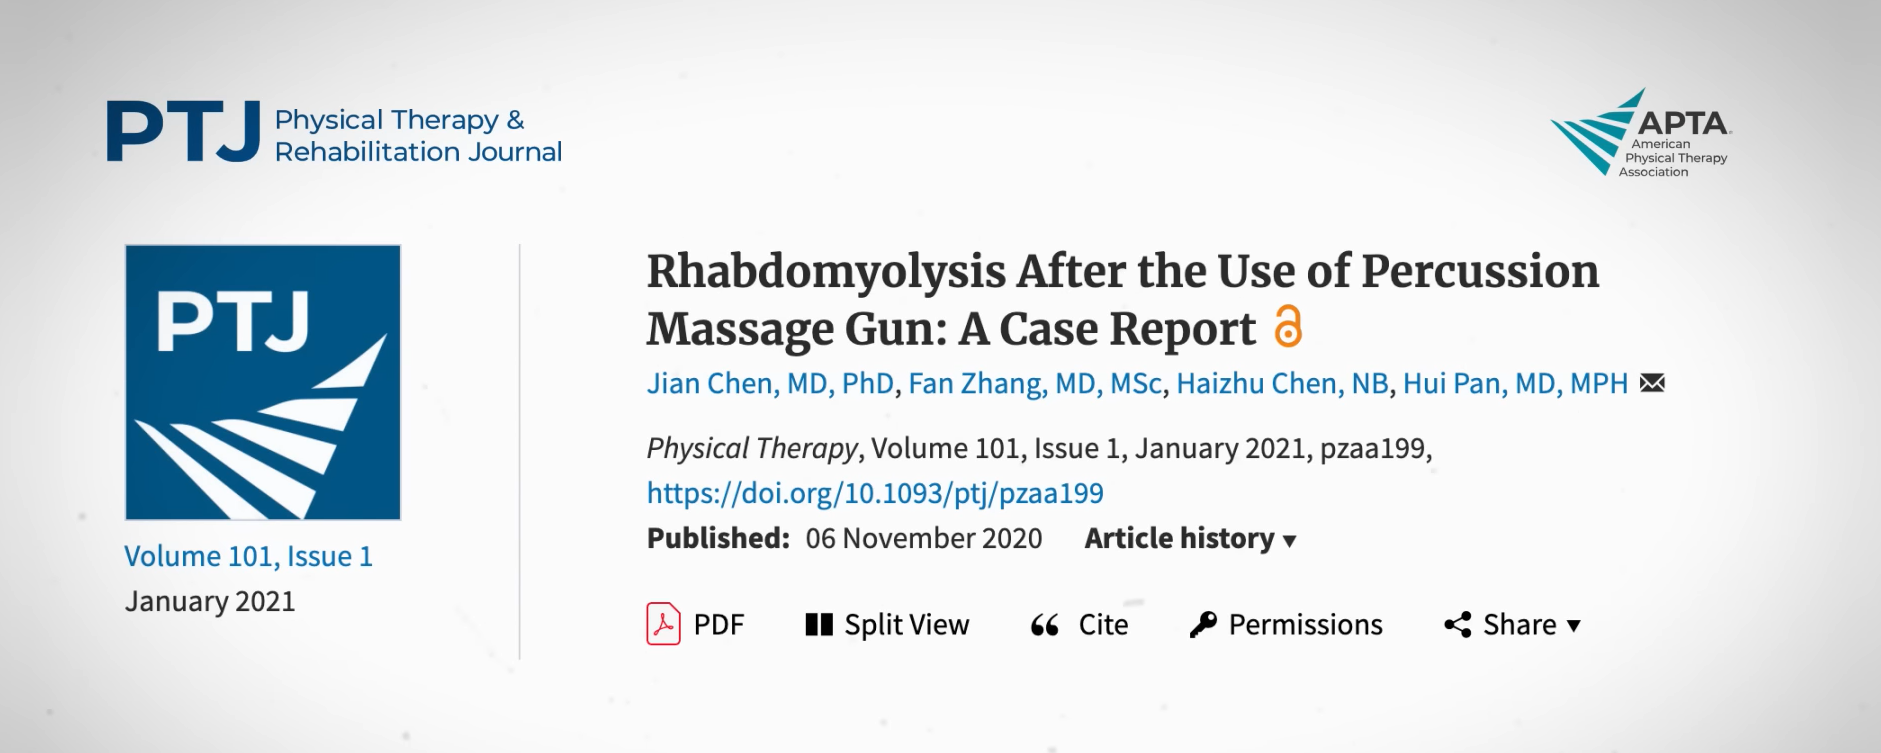 The first article was a case study published in the Physical Therapy and Rehabilitation Journal in 2020. 